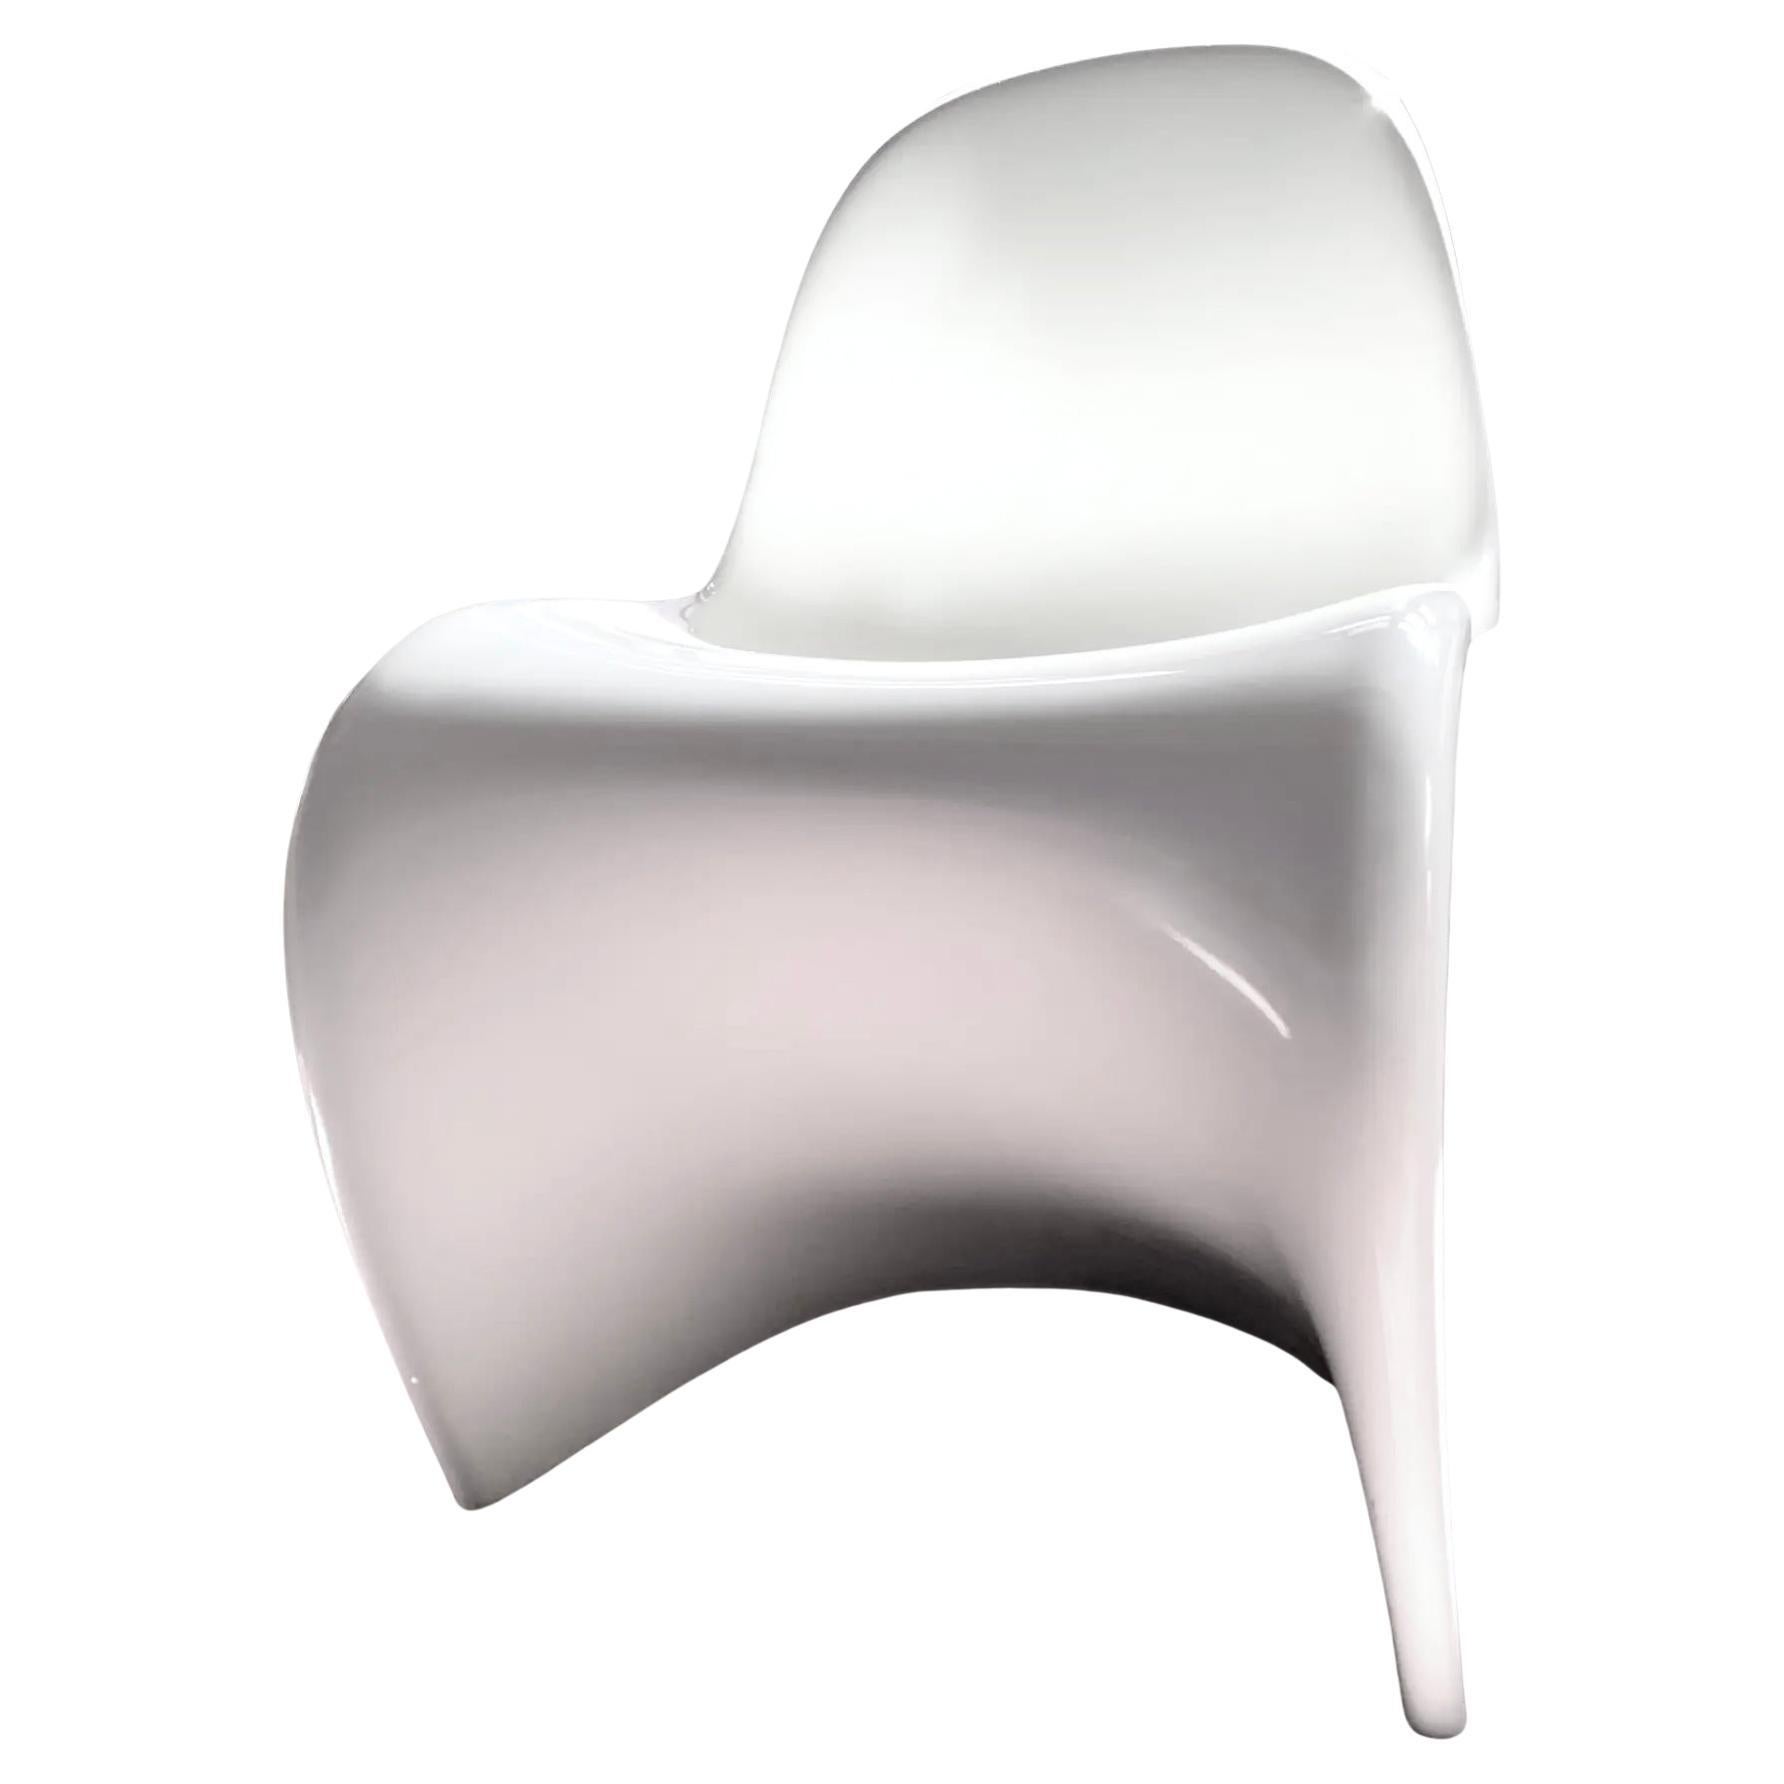 Verner Panton for Vitra Glow Panton Chair, Luminescent, White, Blue, Limited Ed For Sale